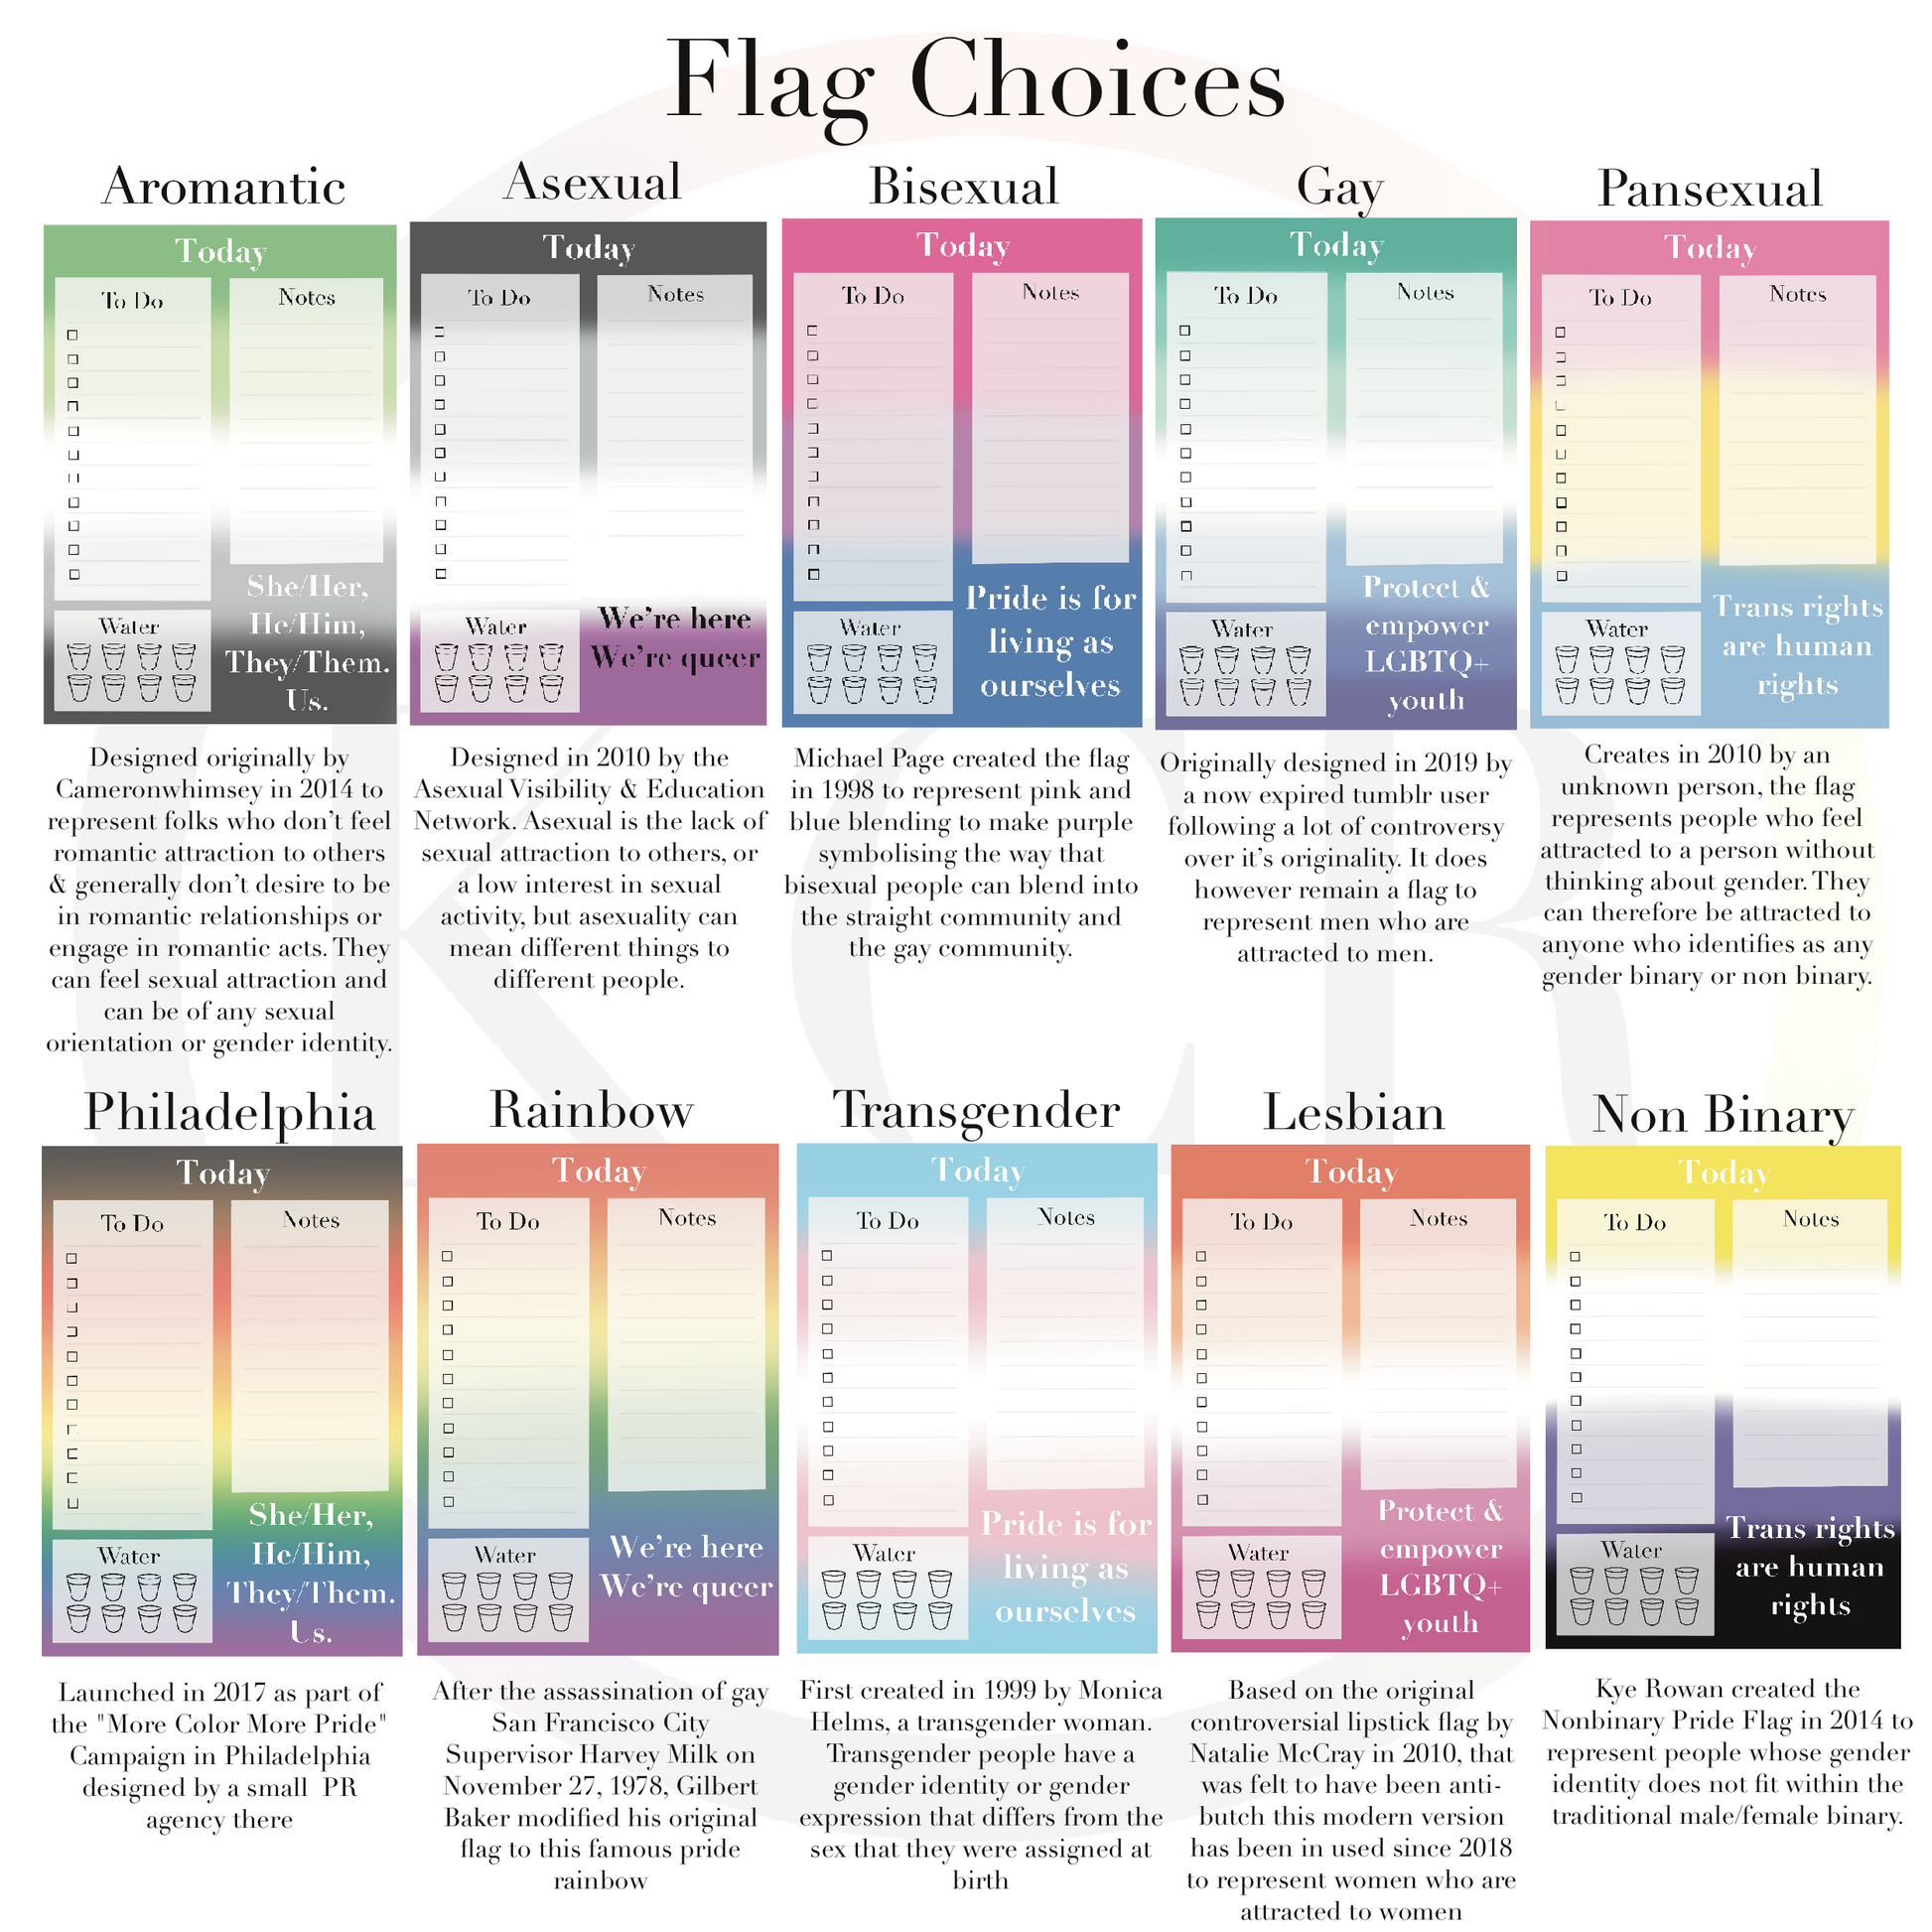 Flag Choices by Pride Flag with detailed description of the origin of each flag underneath